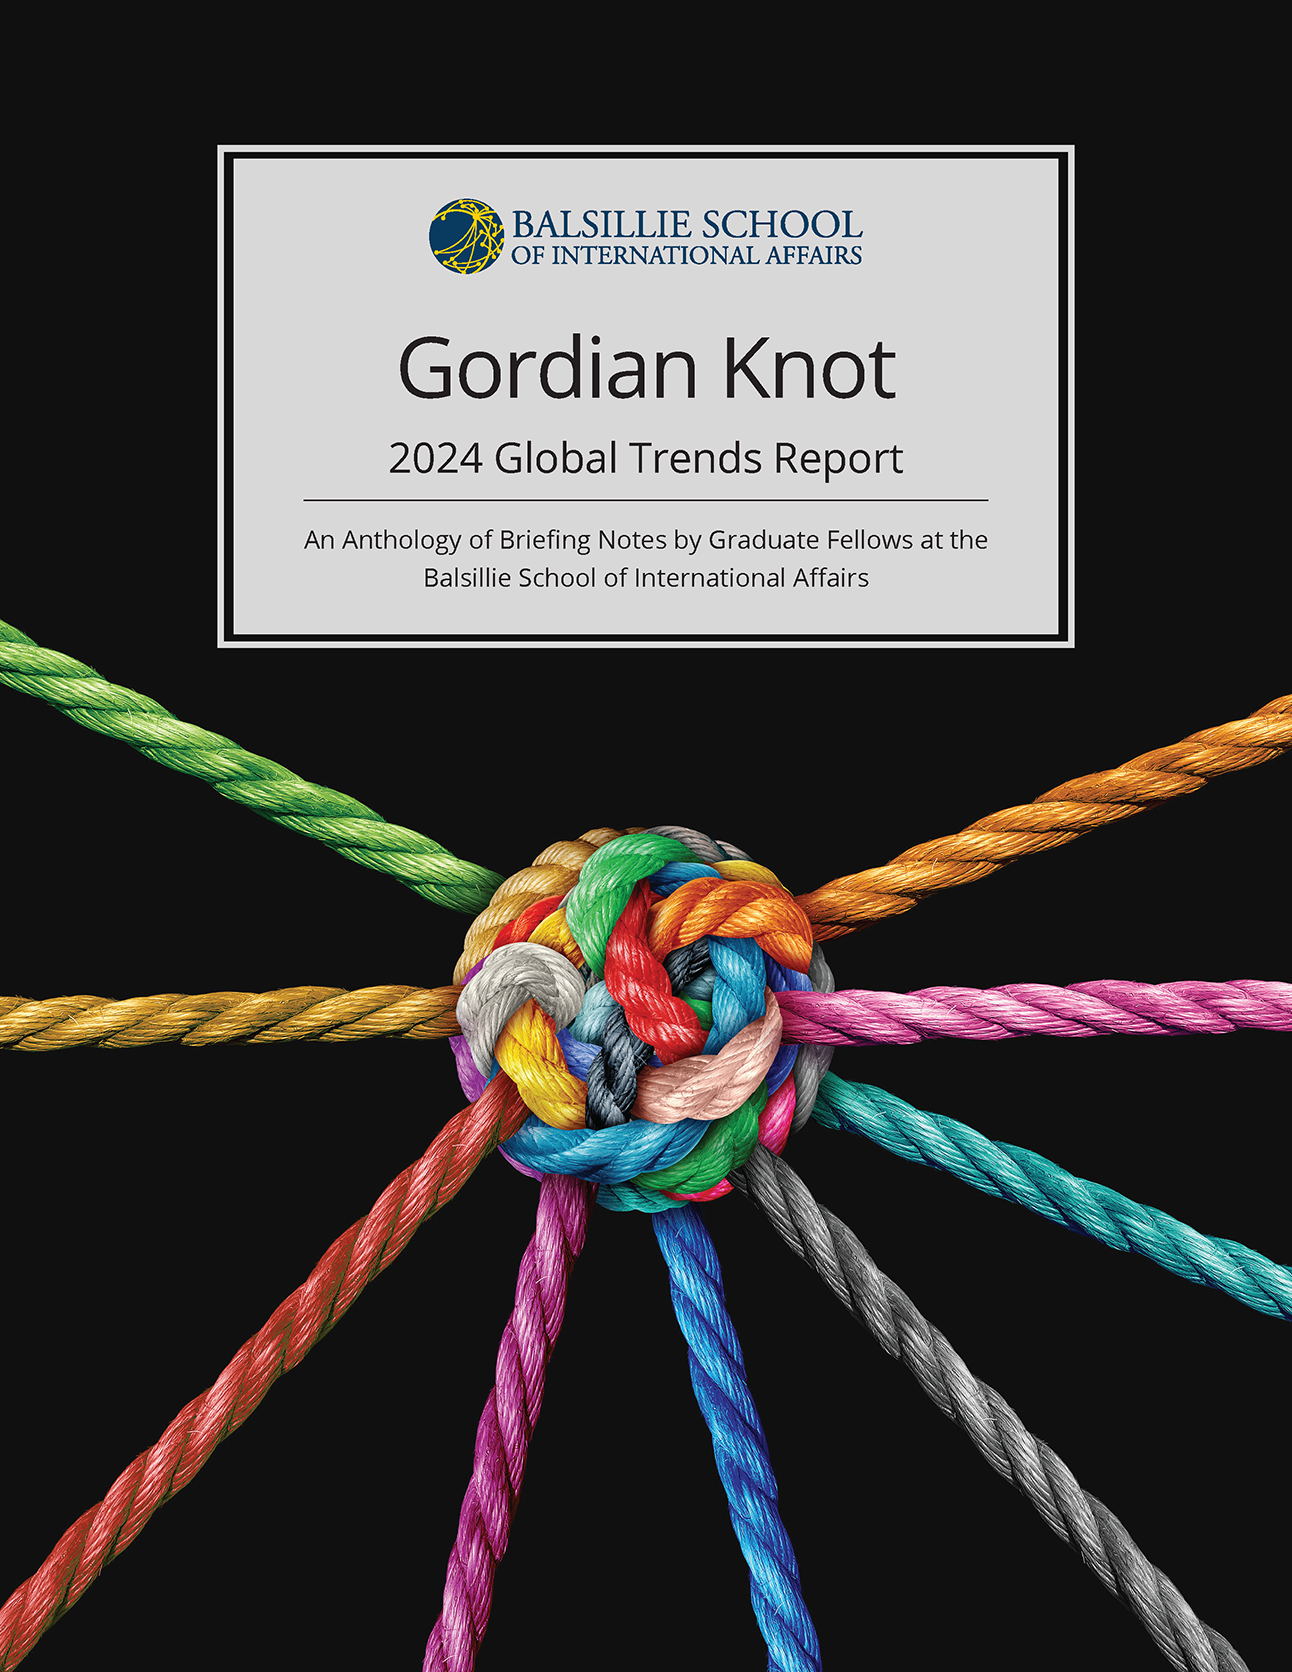 Anthology cover displaying a gordian knot with different coloured rope on a black background.